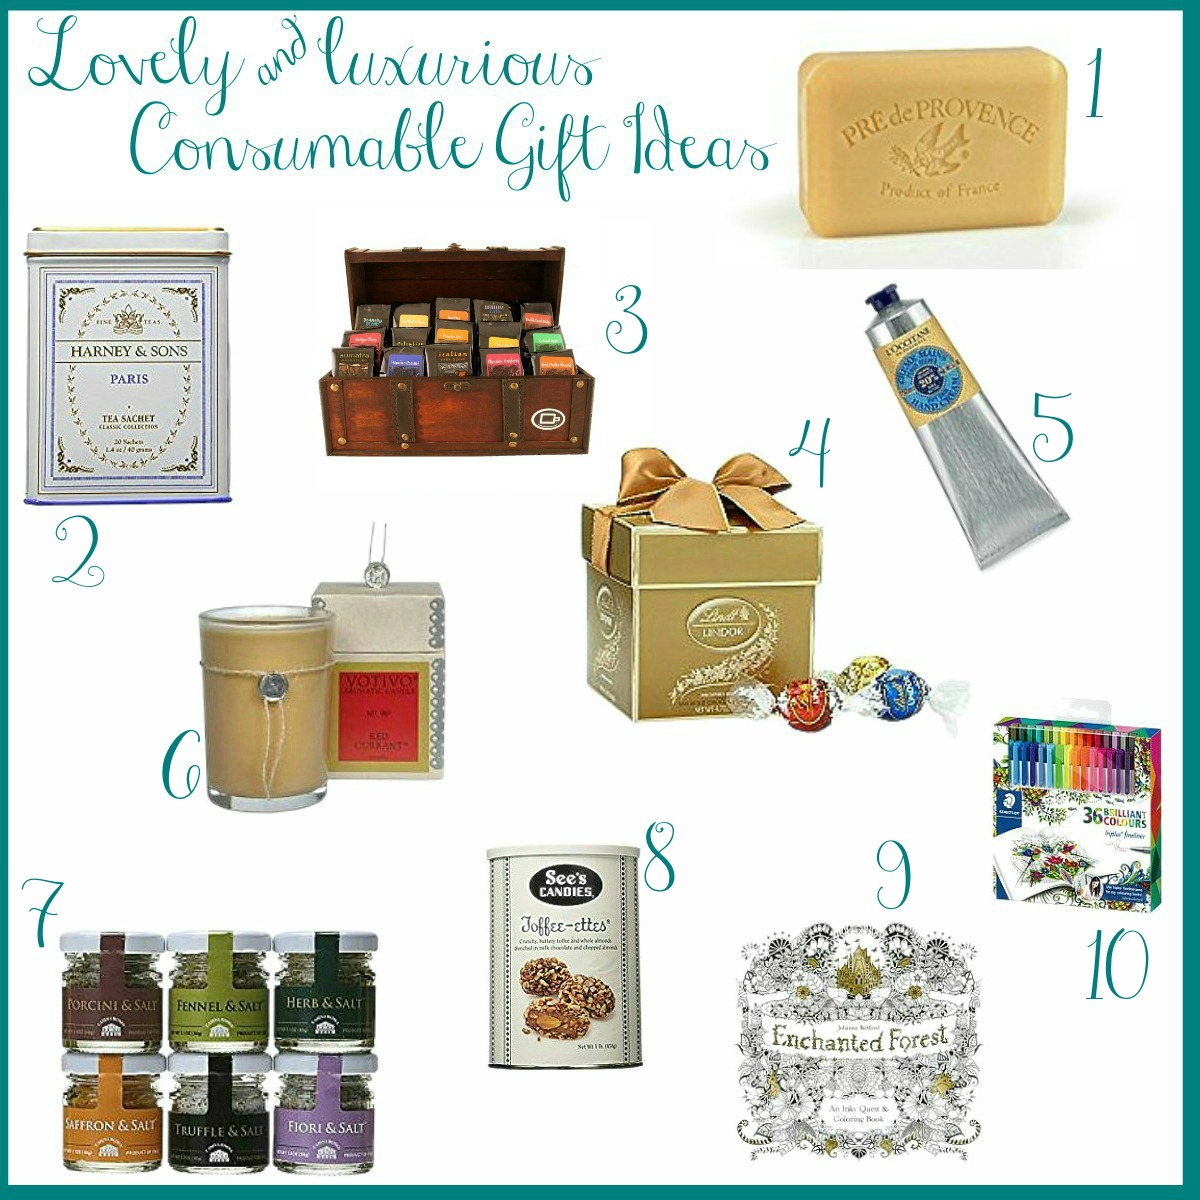 lovely-and-luxurious-consumable-gift-ideas-numbered